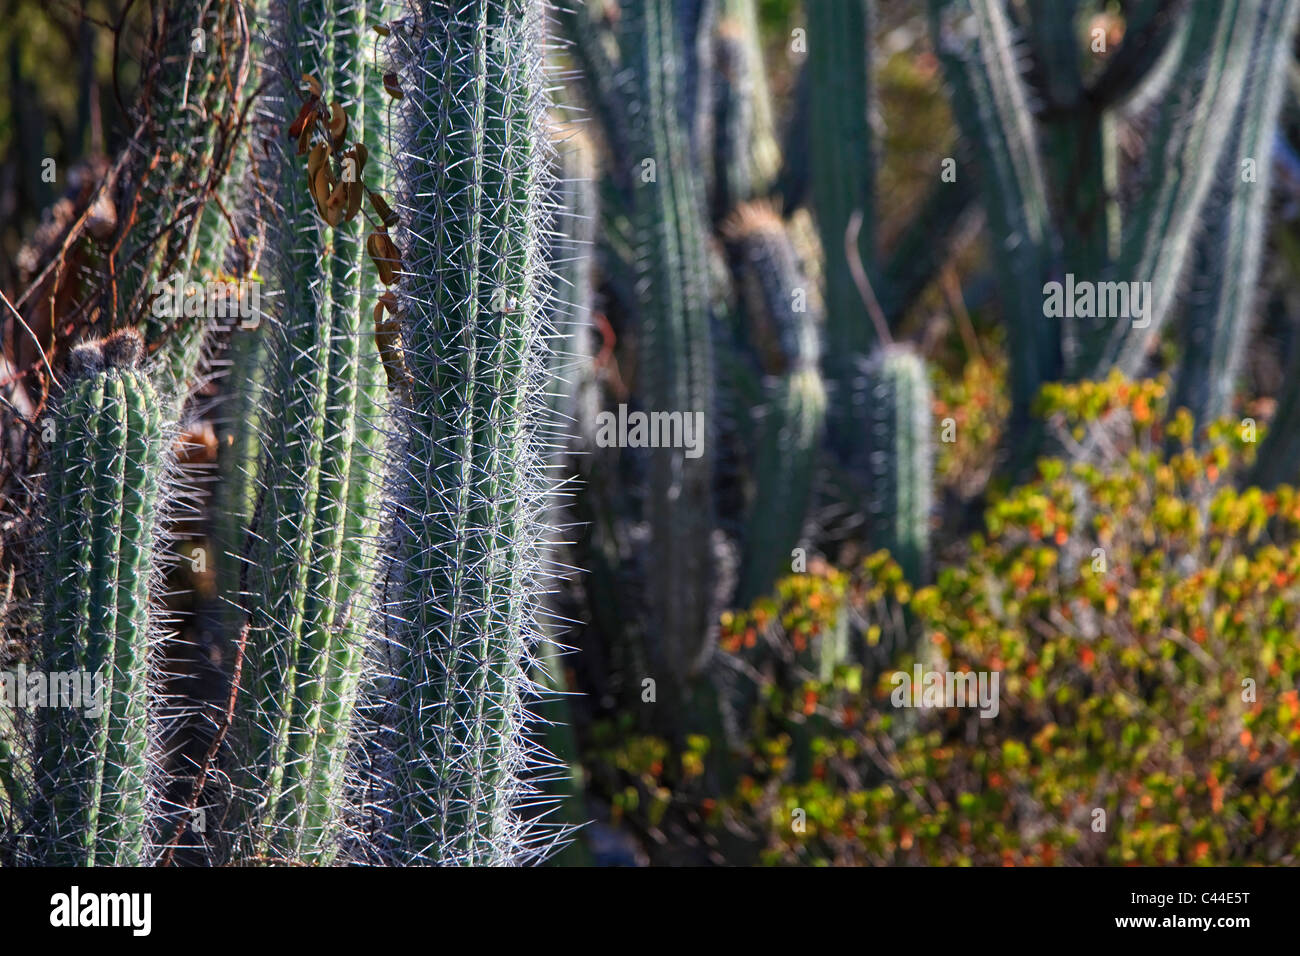 Usa, Caribbean, Puerto Rico, West Coast, Guanica Biosphere Reserve, Subtropical Dry Forest Stock Photo